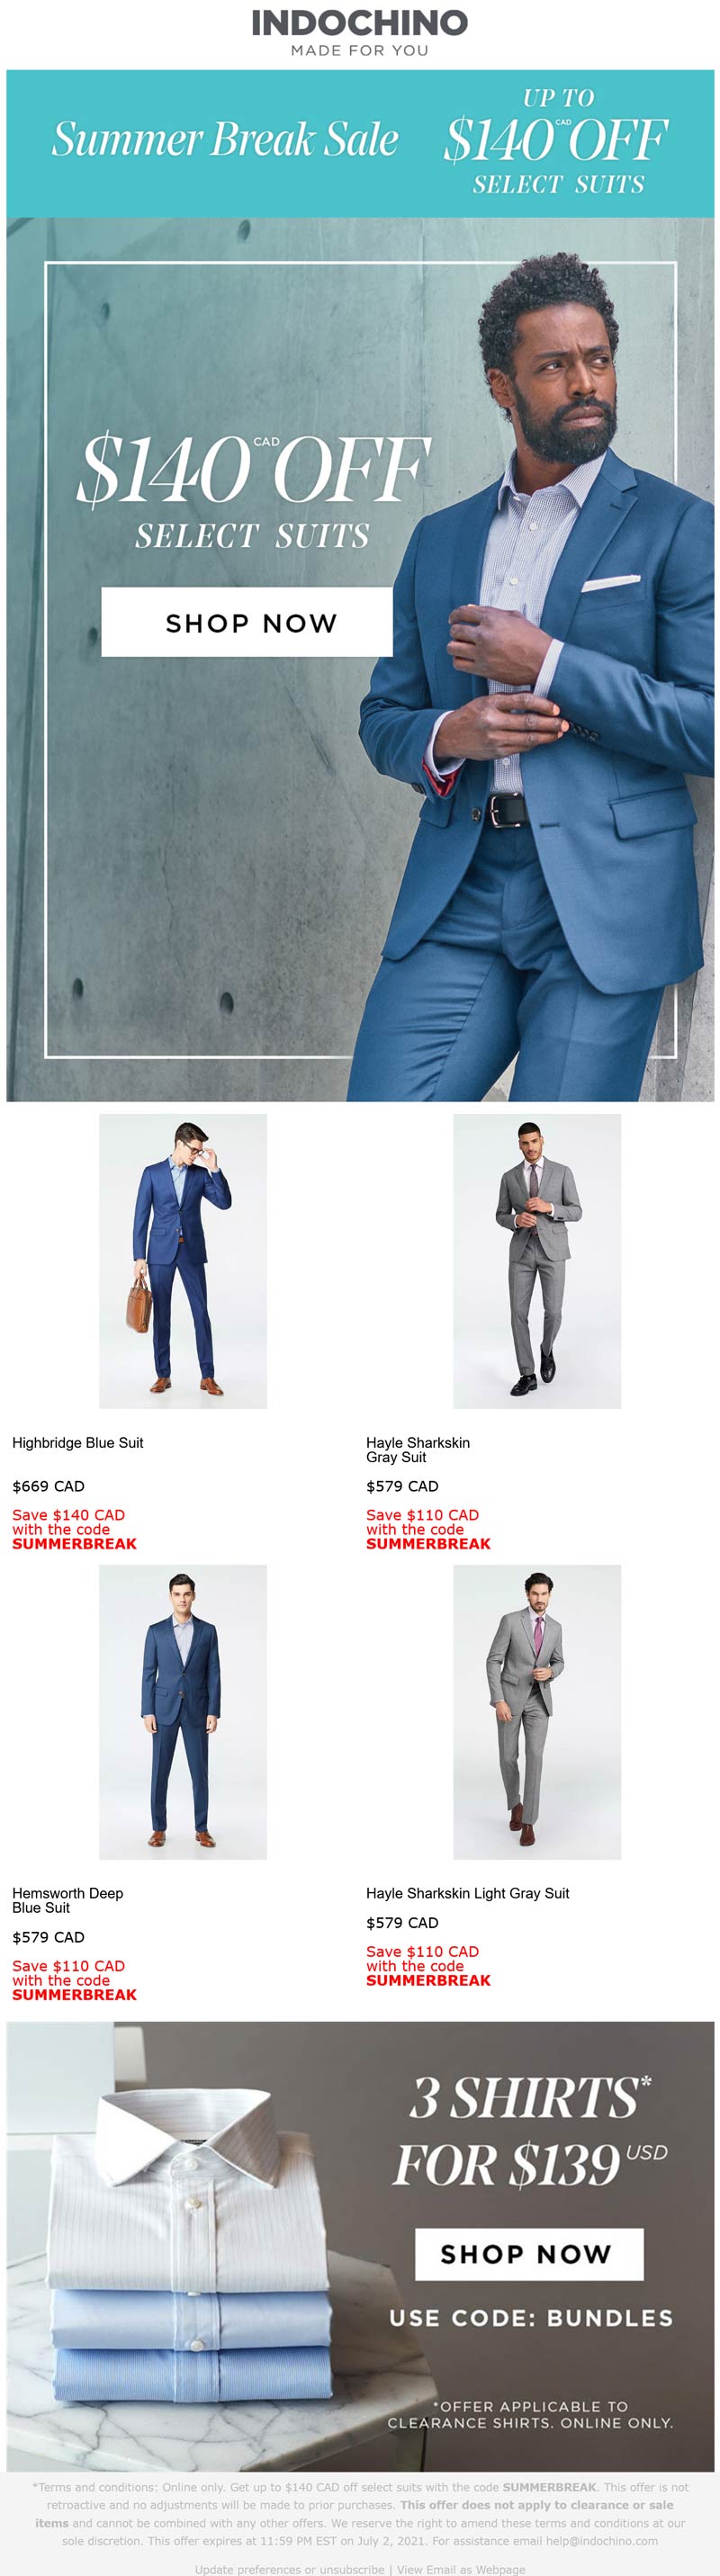 Indochino stores Coupon  $110 off various suits at Indochino via promo code SUMMERBREAK and INDEPENDENCEDAY #indochino 